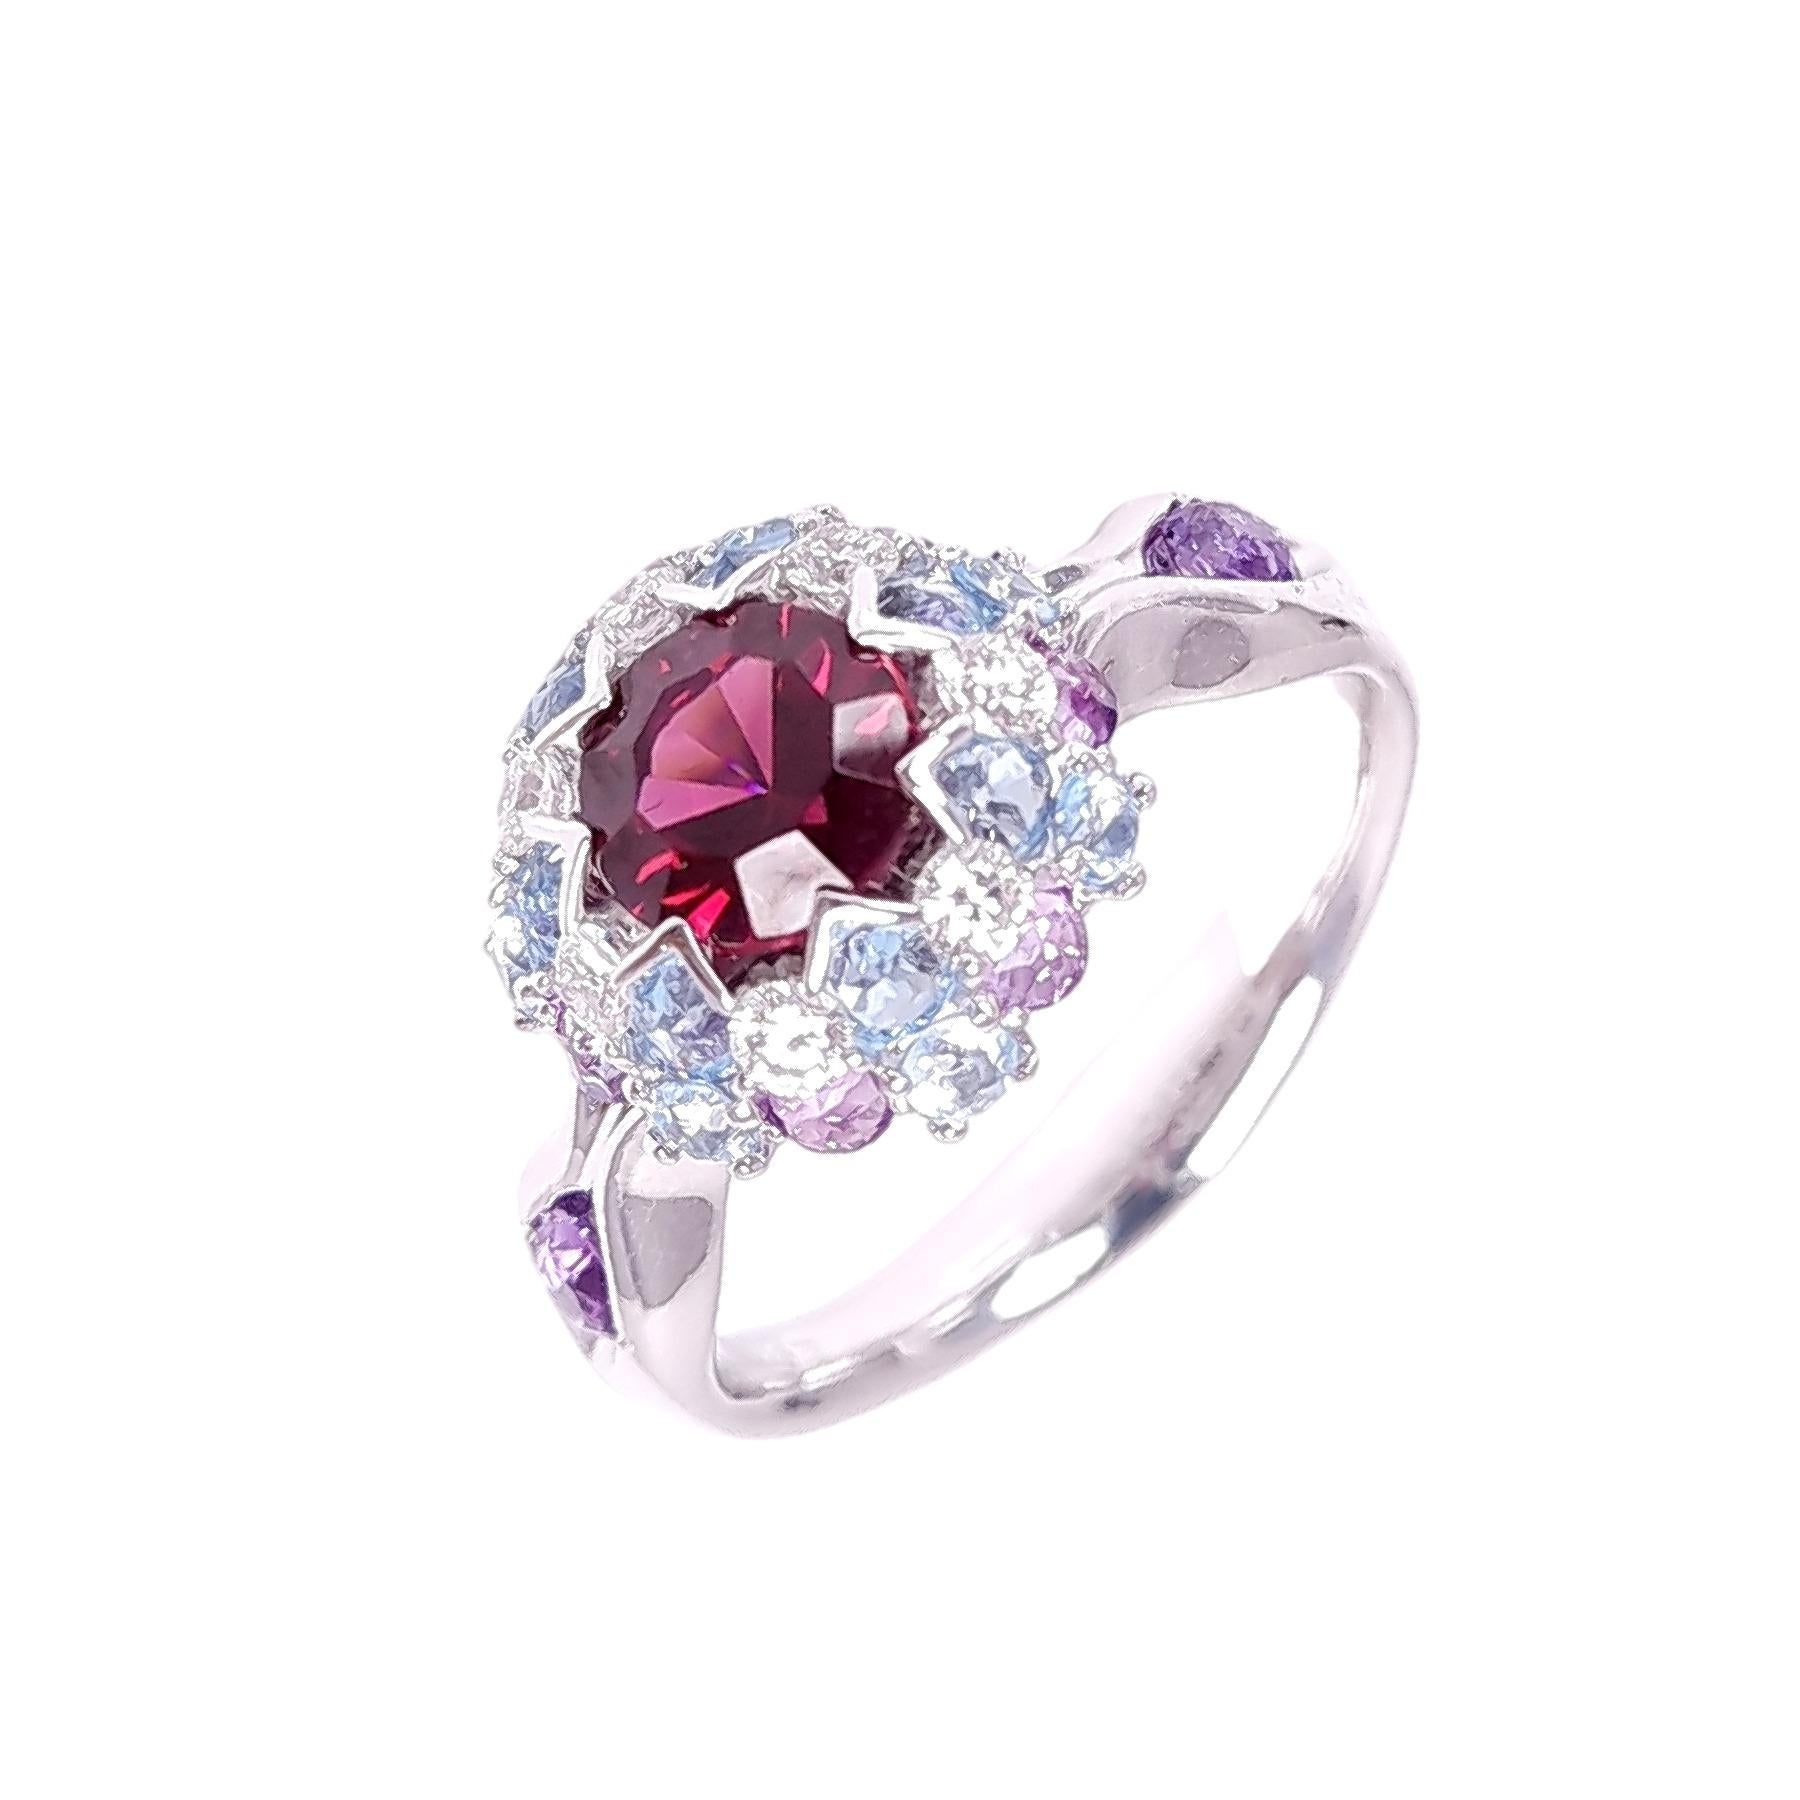 The combination of energetic bright Rhodolite garnet, sky like topaz, mysterious amethyst, and dazzling diamonds are used in the MOISEIKIN's Aurora collection, elaborating with a creative approach of an upside-down setting. Strictly selected precise